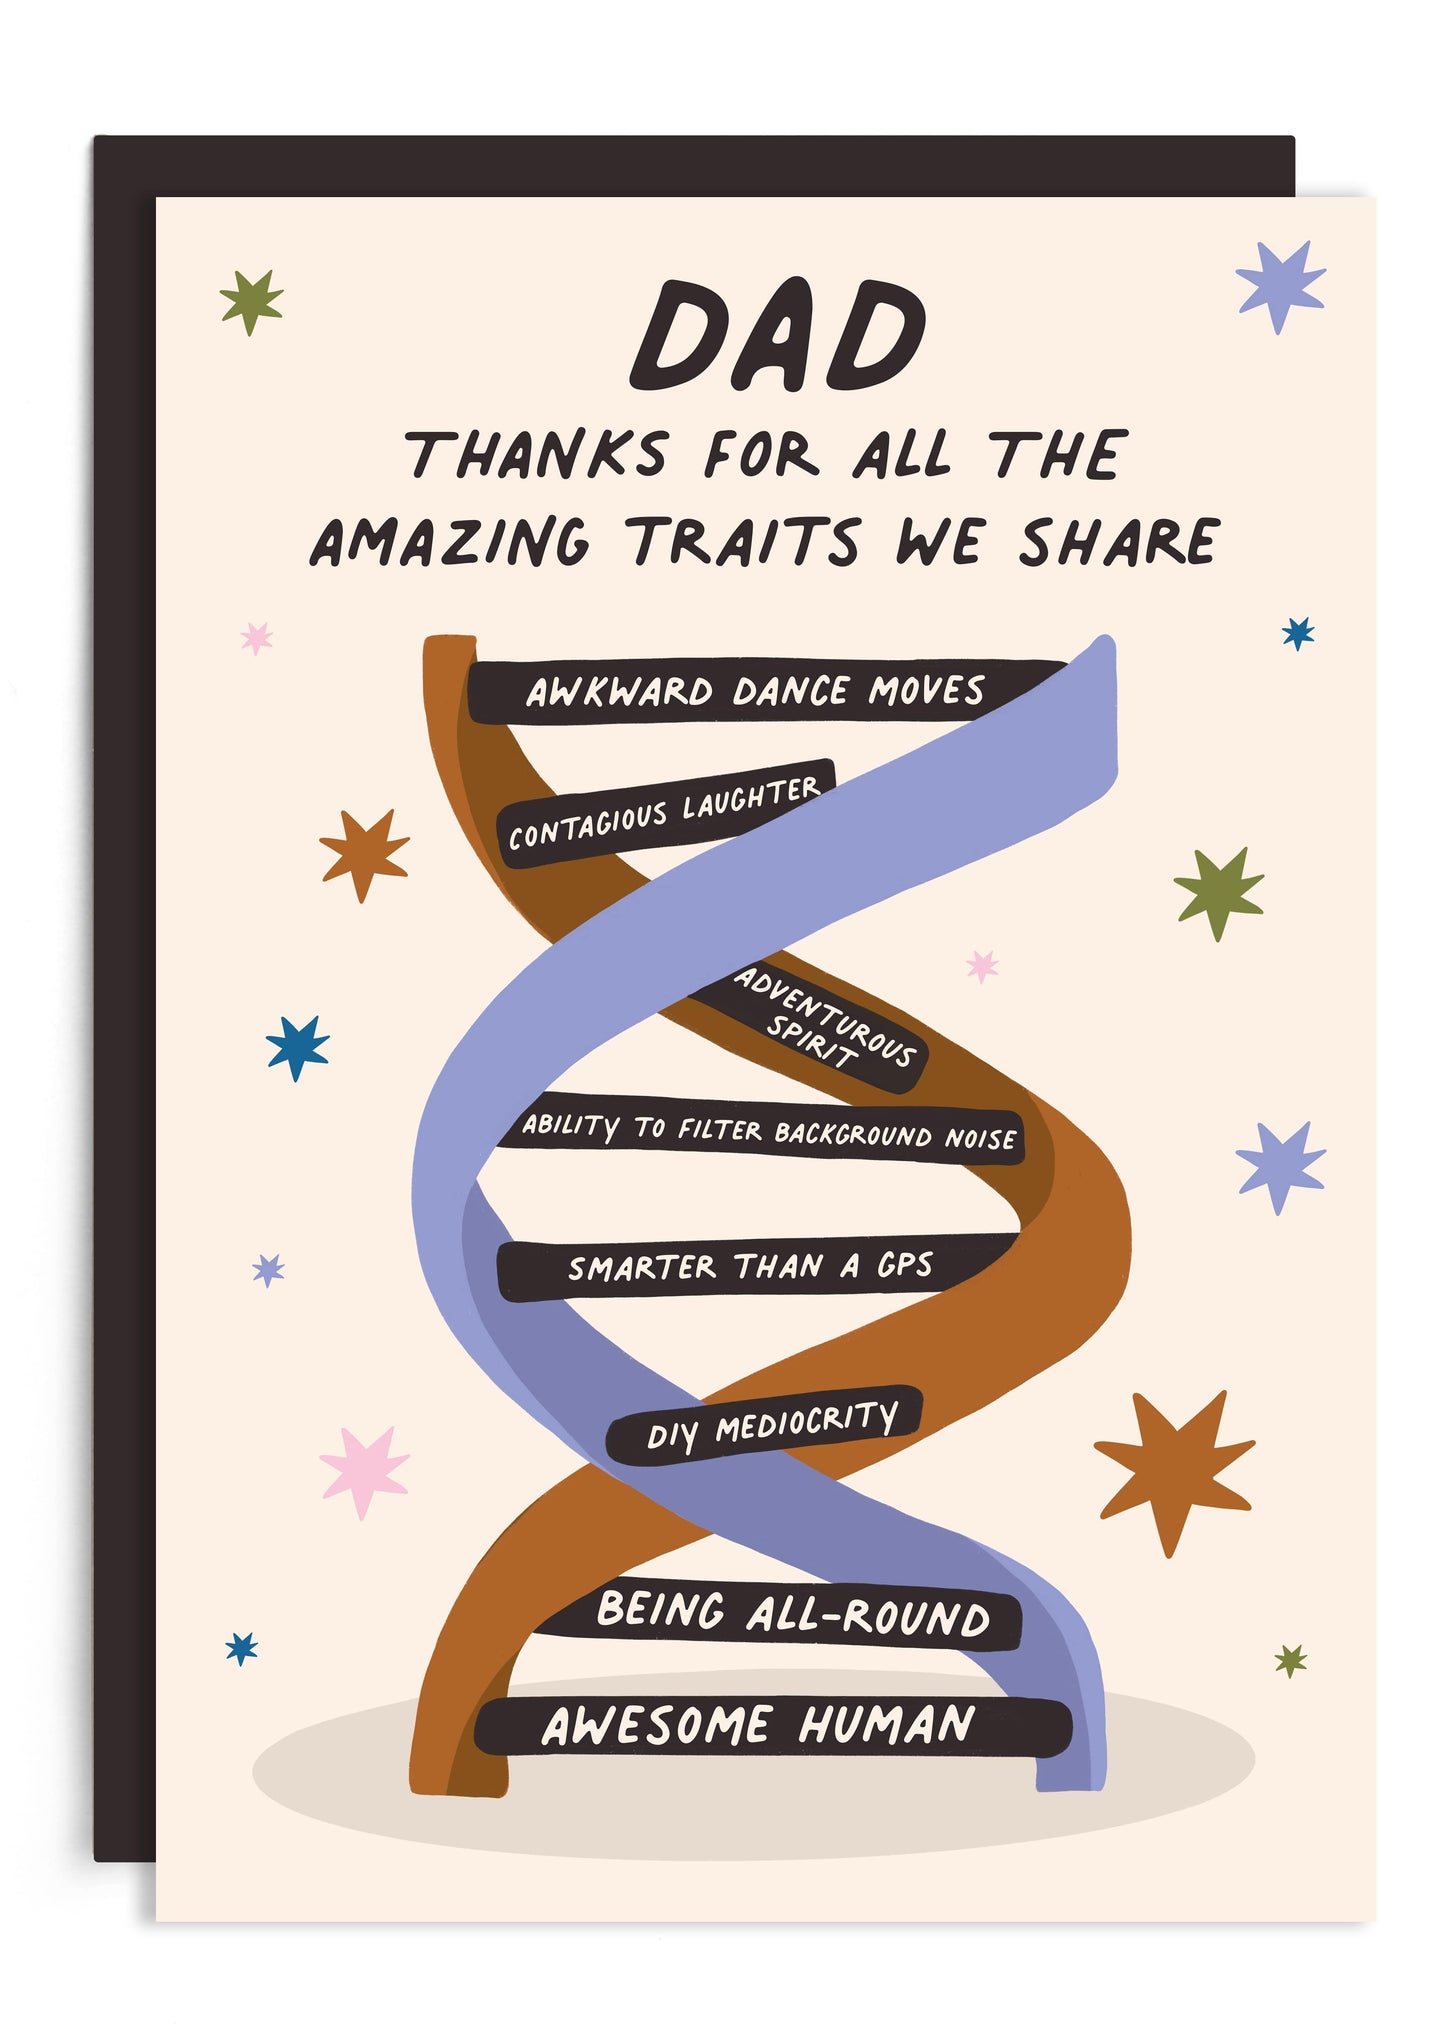 DNA Dad Card | Father’s Day Card | Science Dad Birthday Card